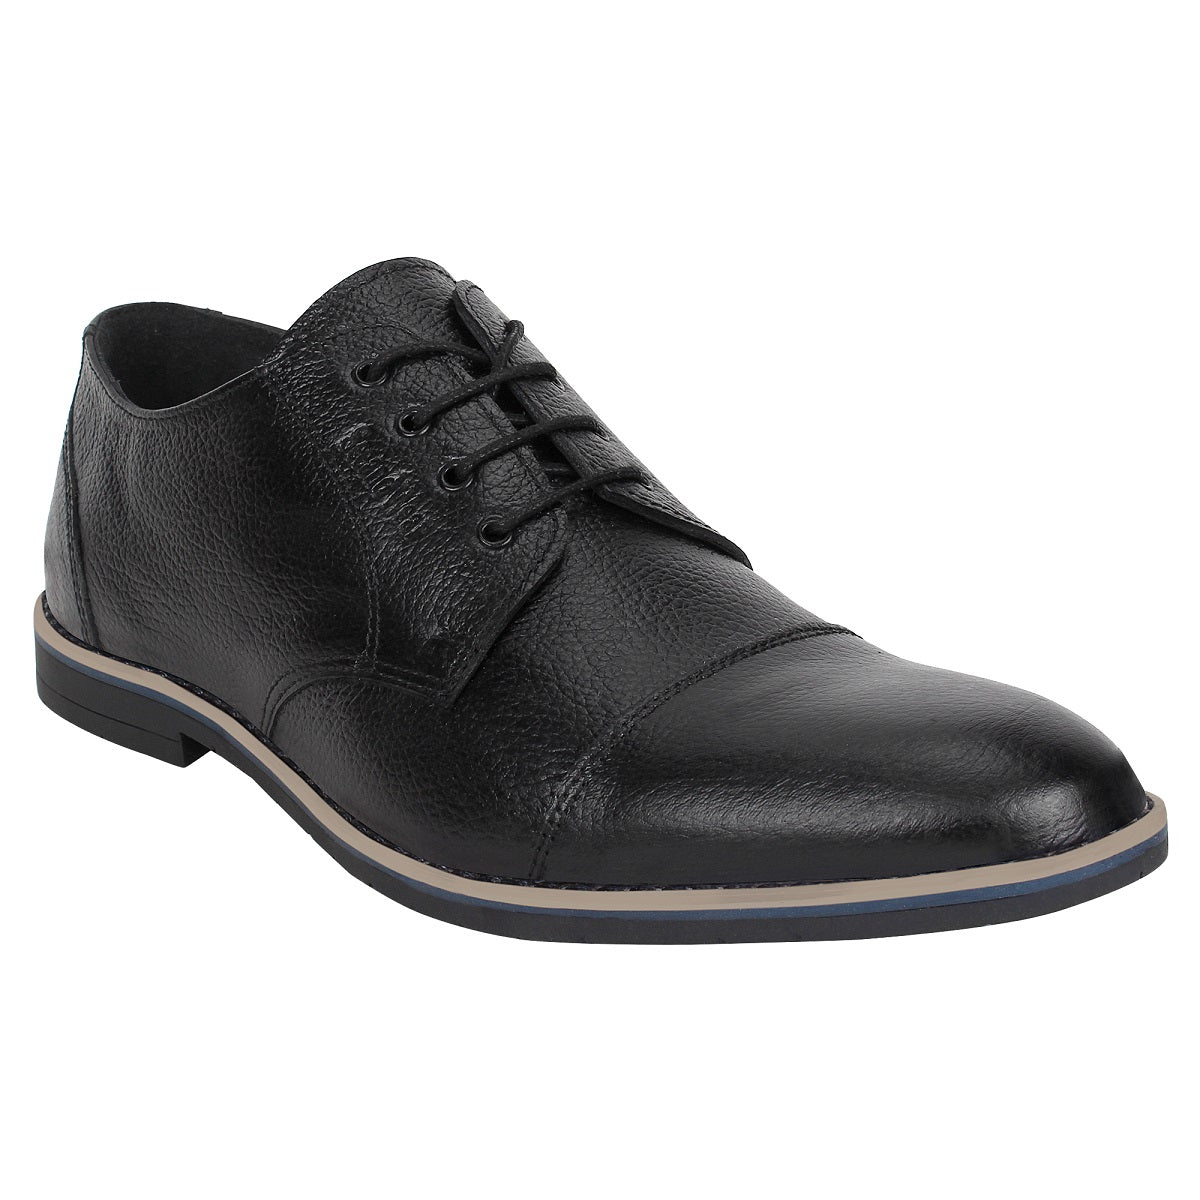 Branded Lace Up Shoes for Men -Defective